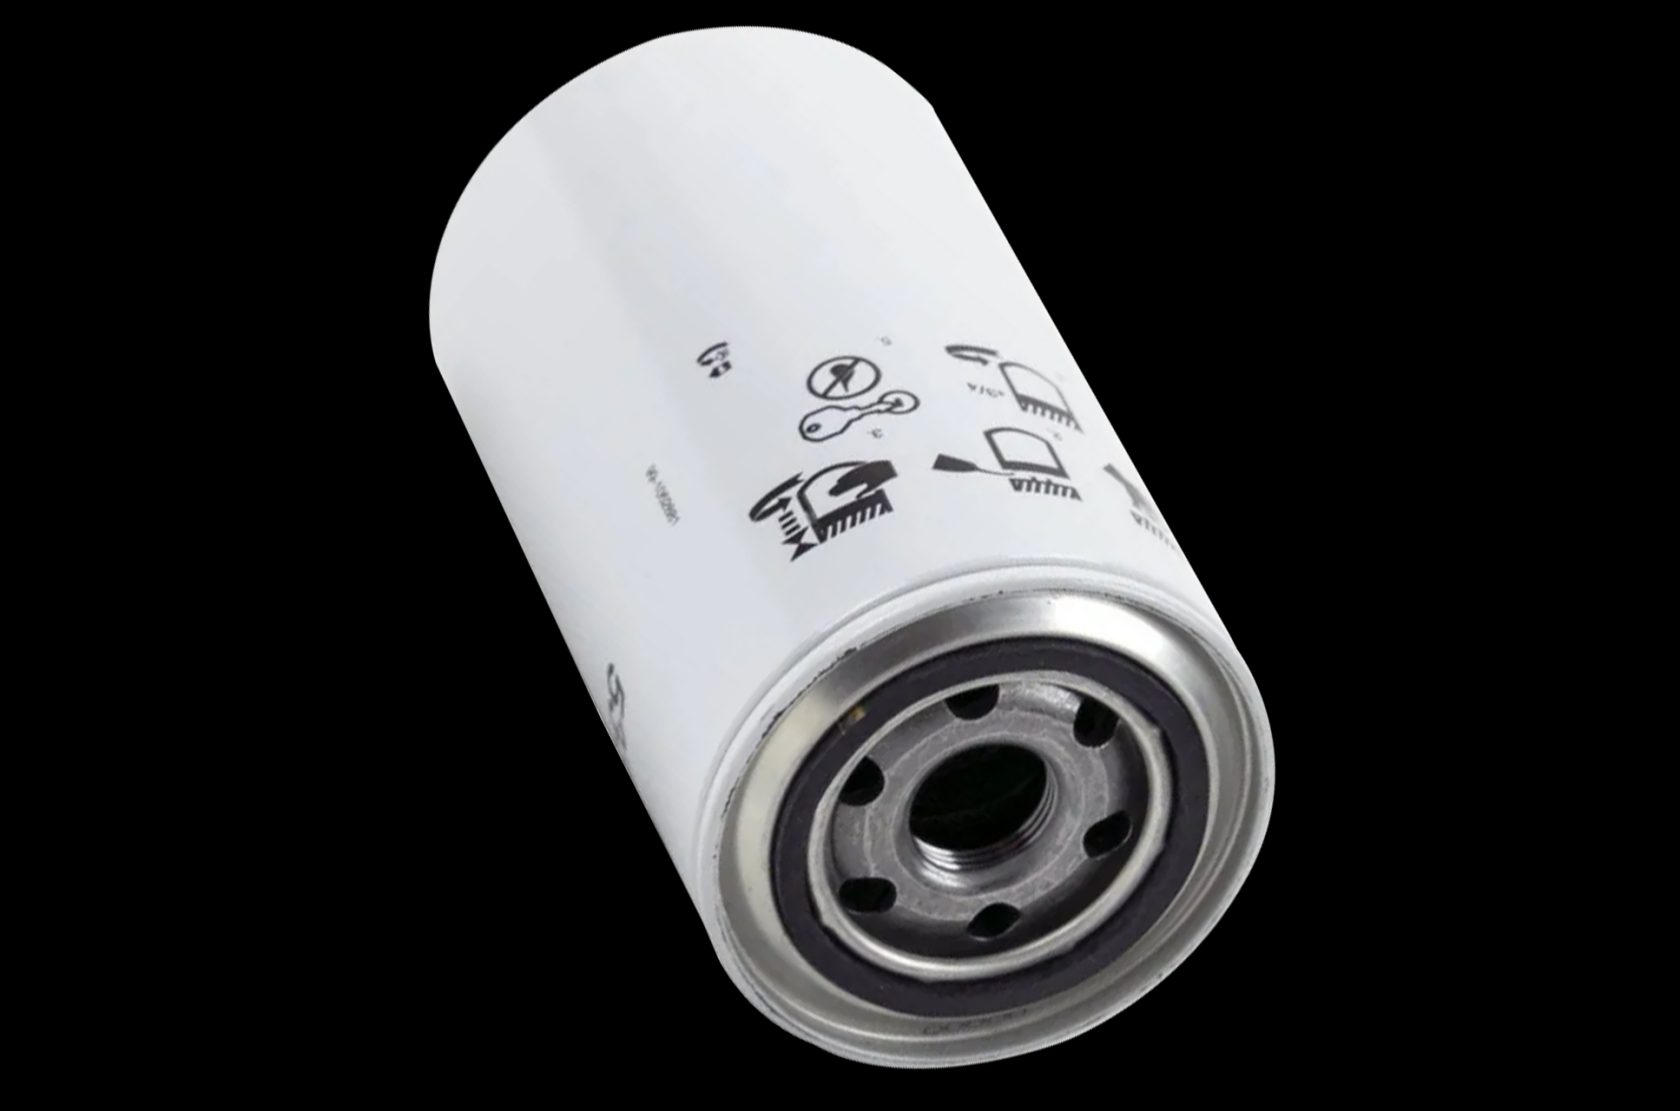 WIX NP FUEL FILTERS